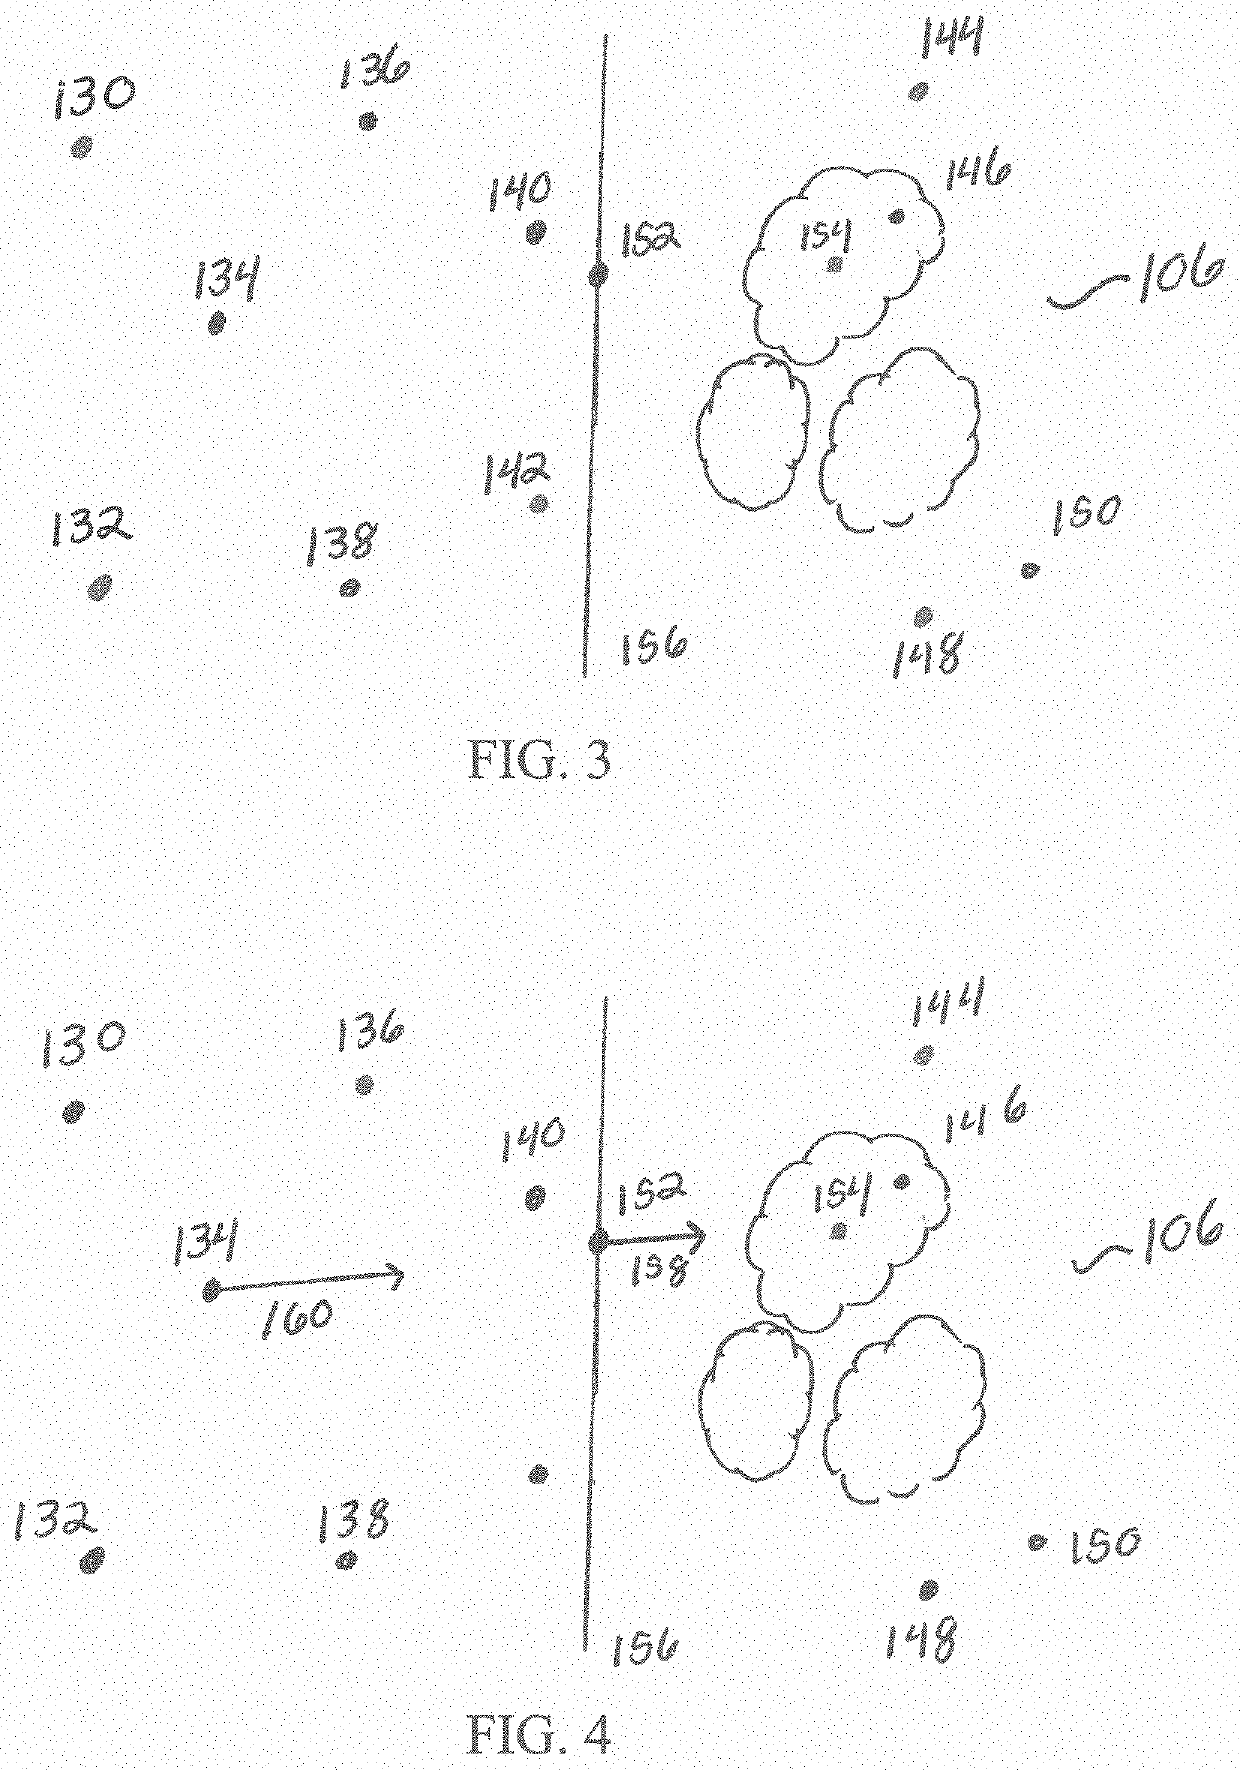 Methods and apparatus for geospatial data generation